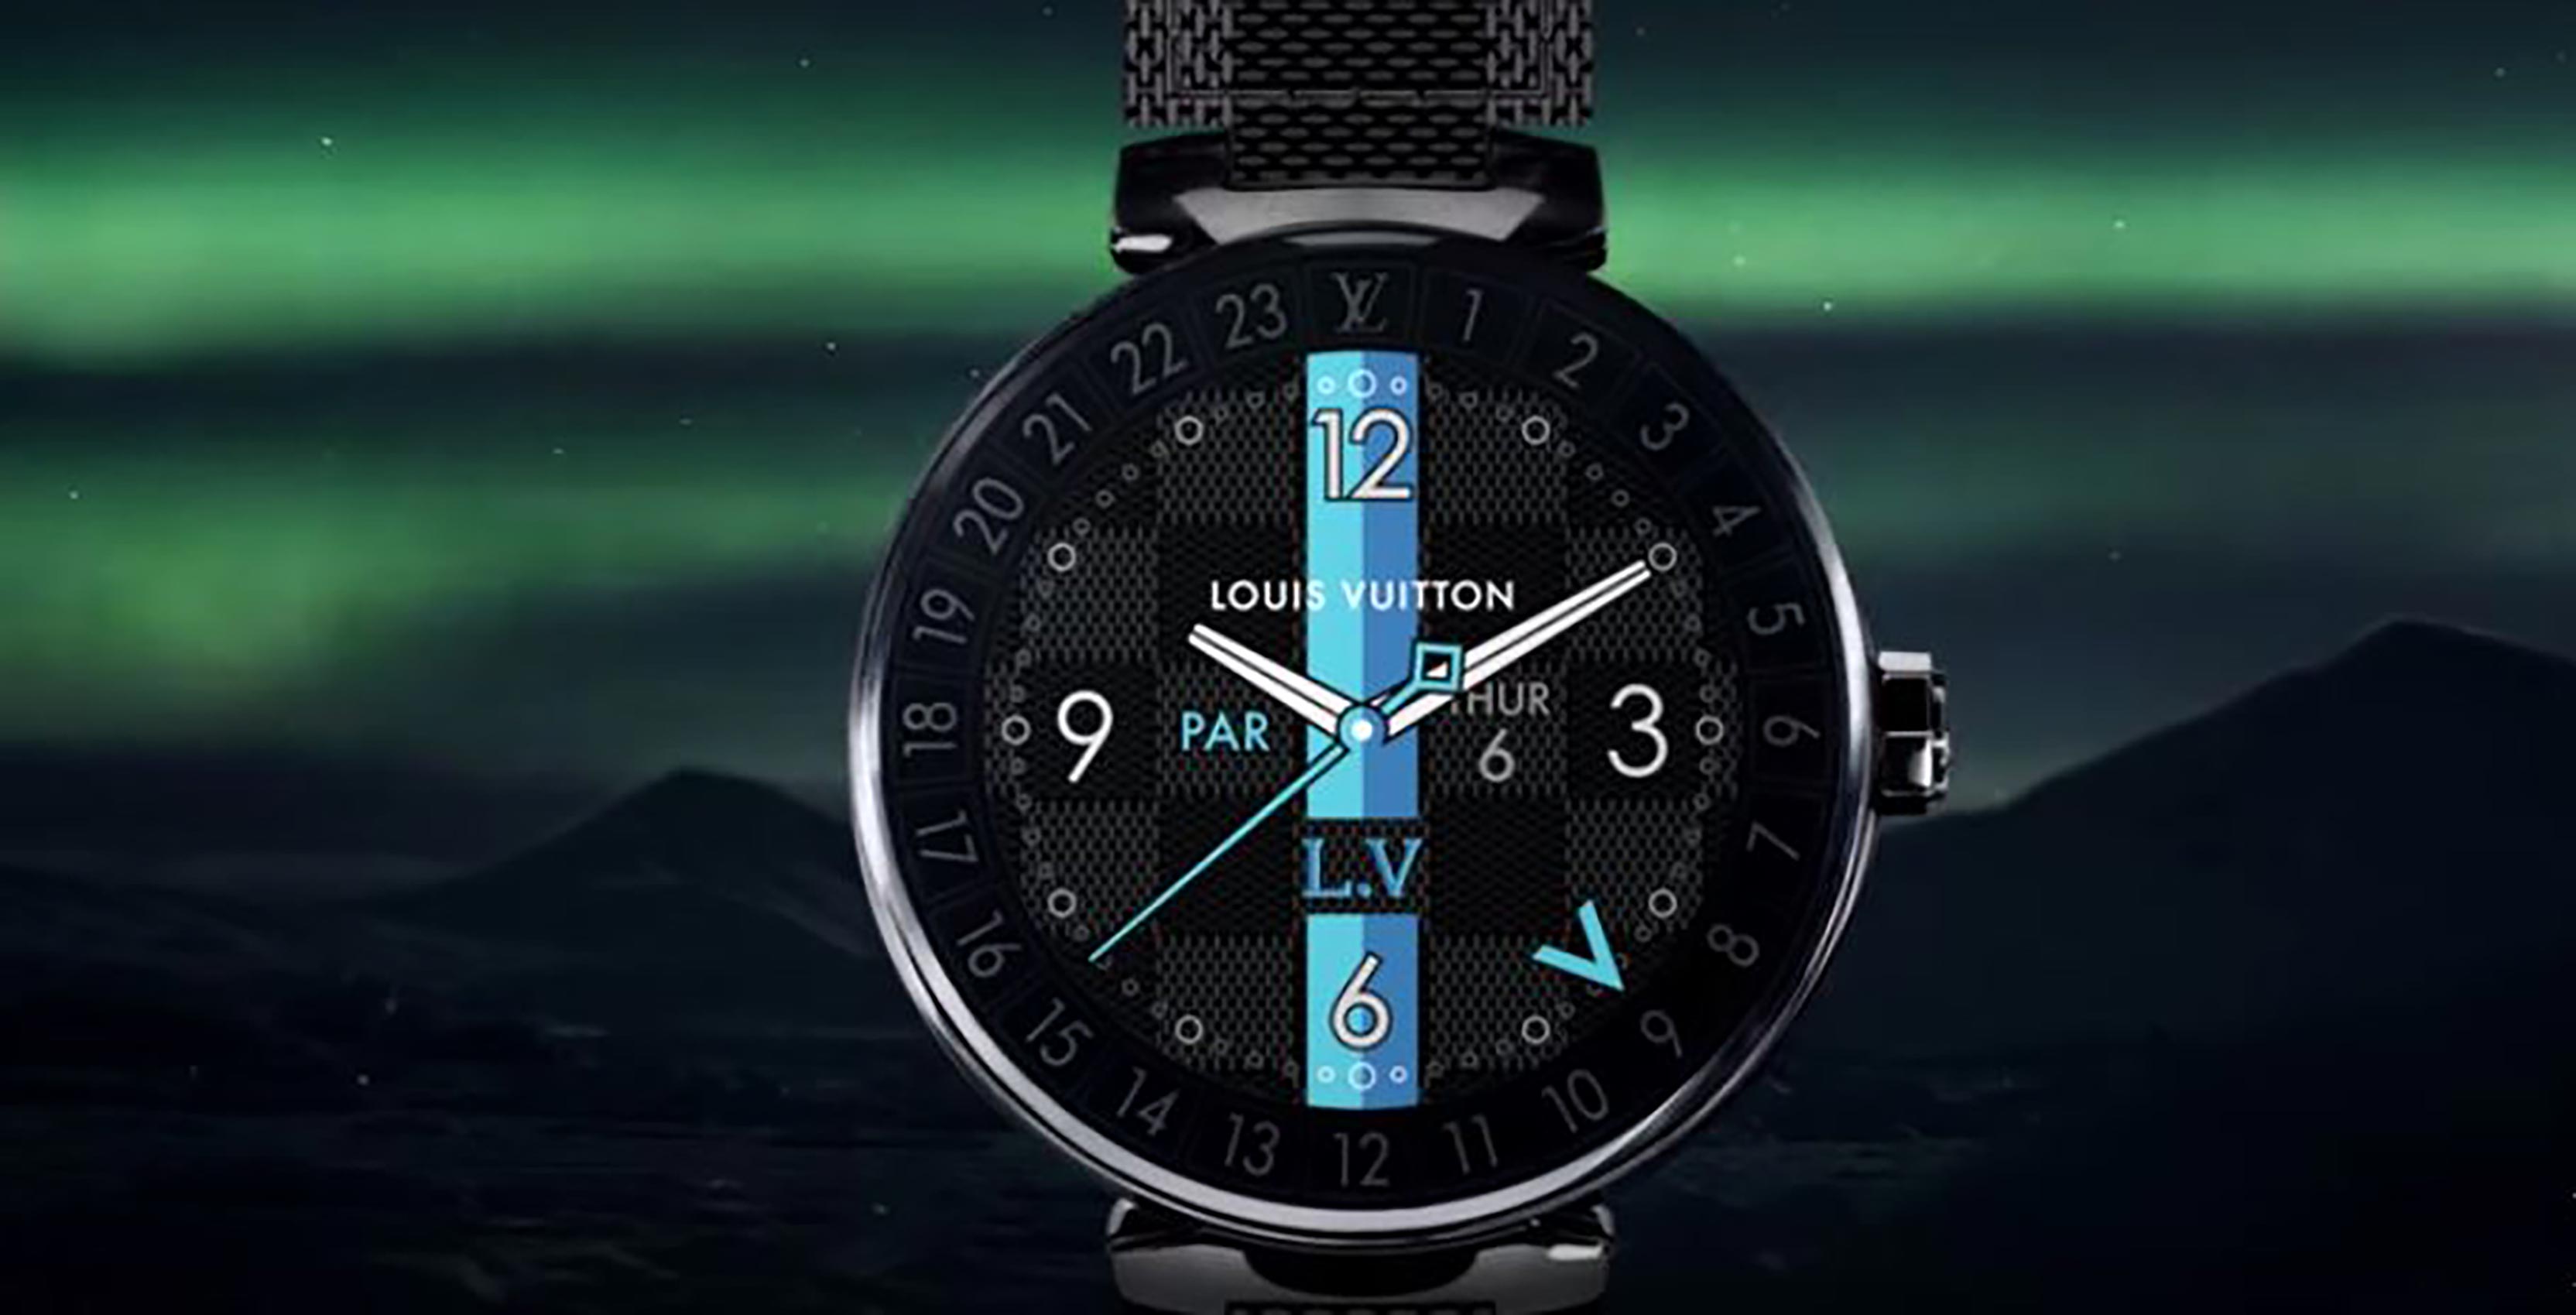 Louis Vuitton&#39;s Tambour Horizon smartwatch launches with $3,850 price tag | MobileSyrup